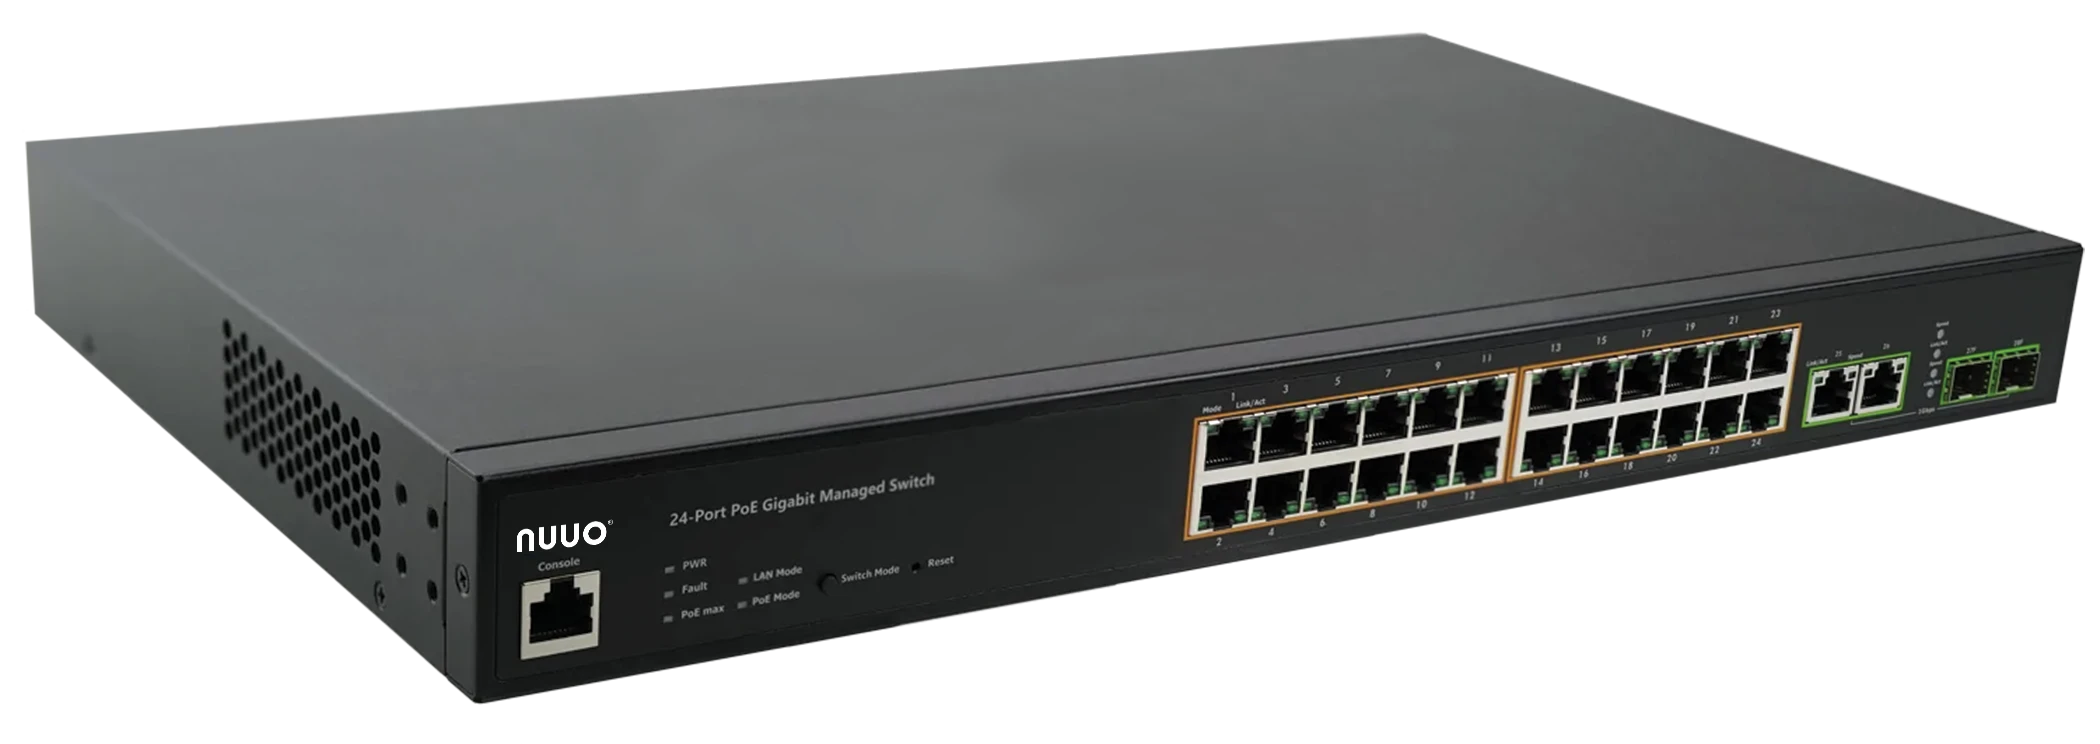 738-n24poe-switch-product-image-front-tilt-1688077481121.png